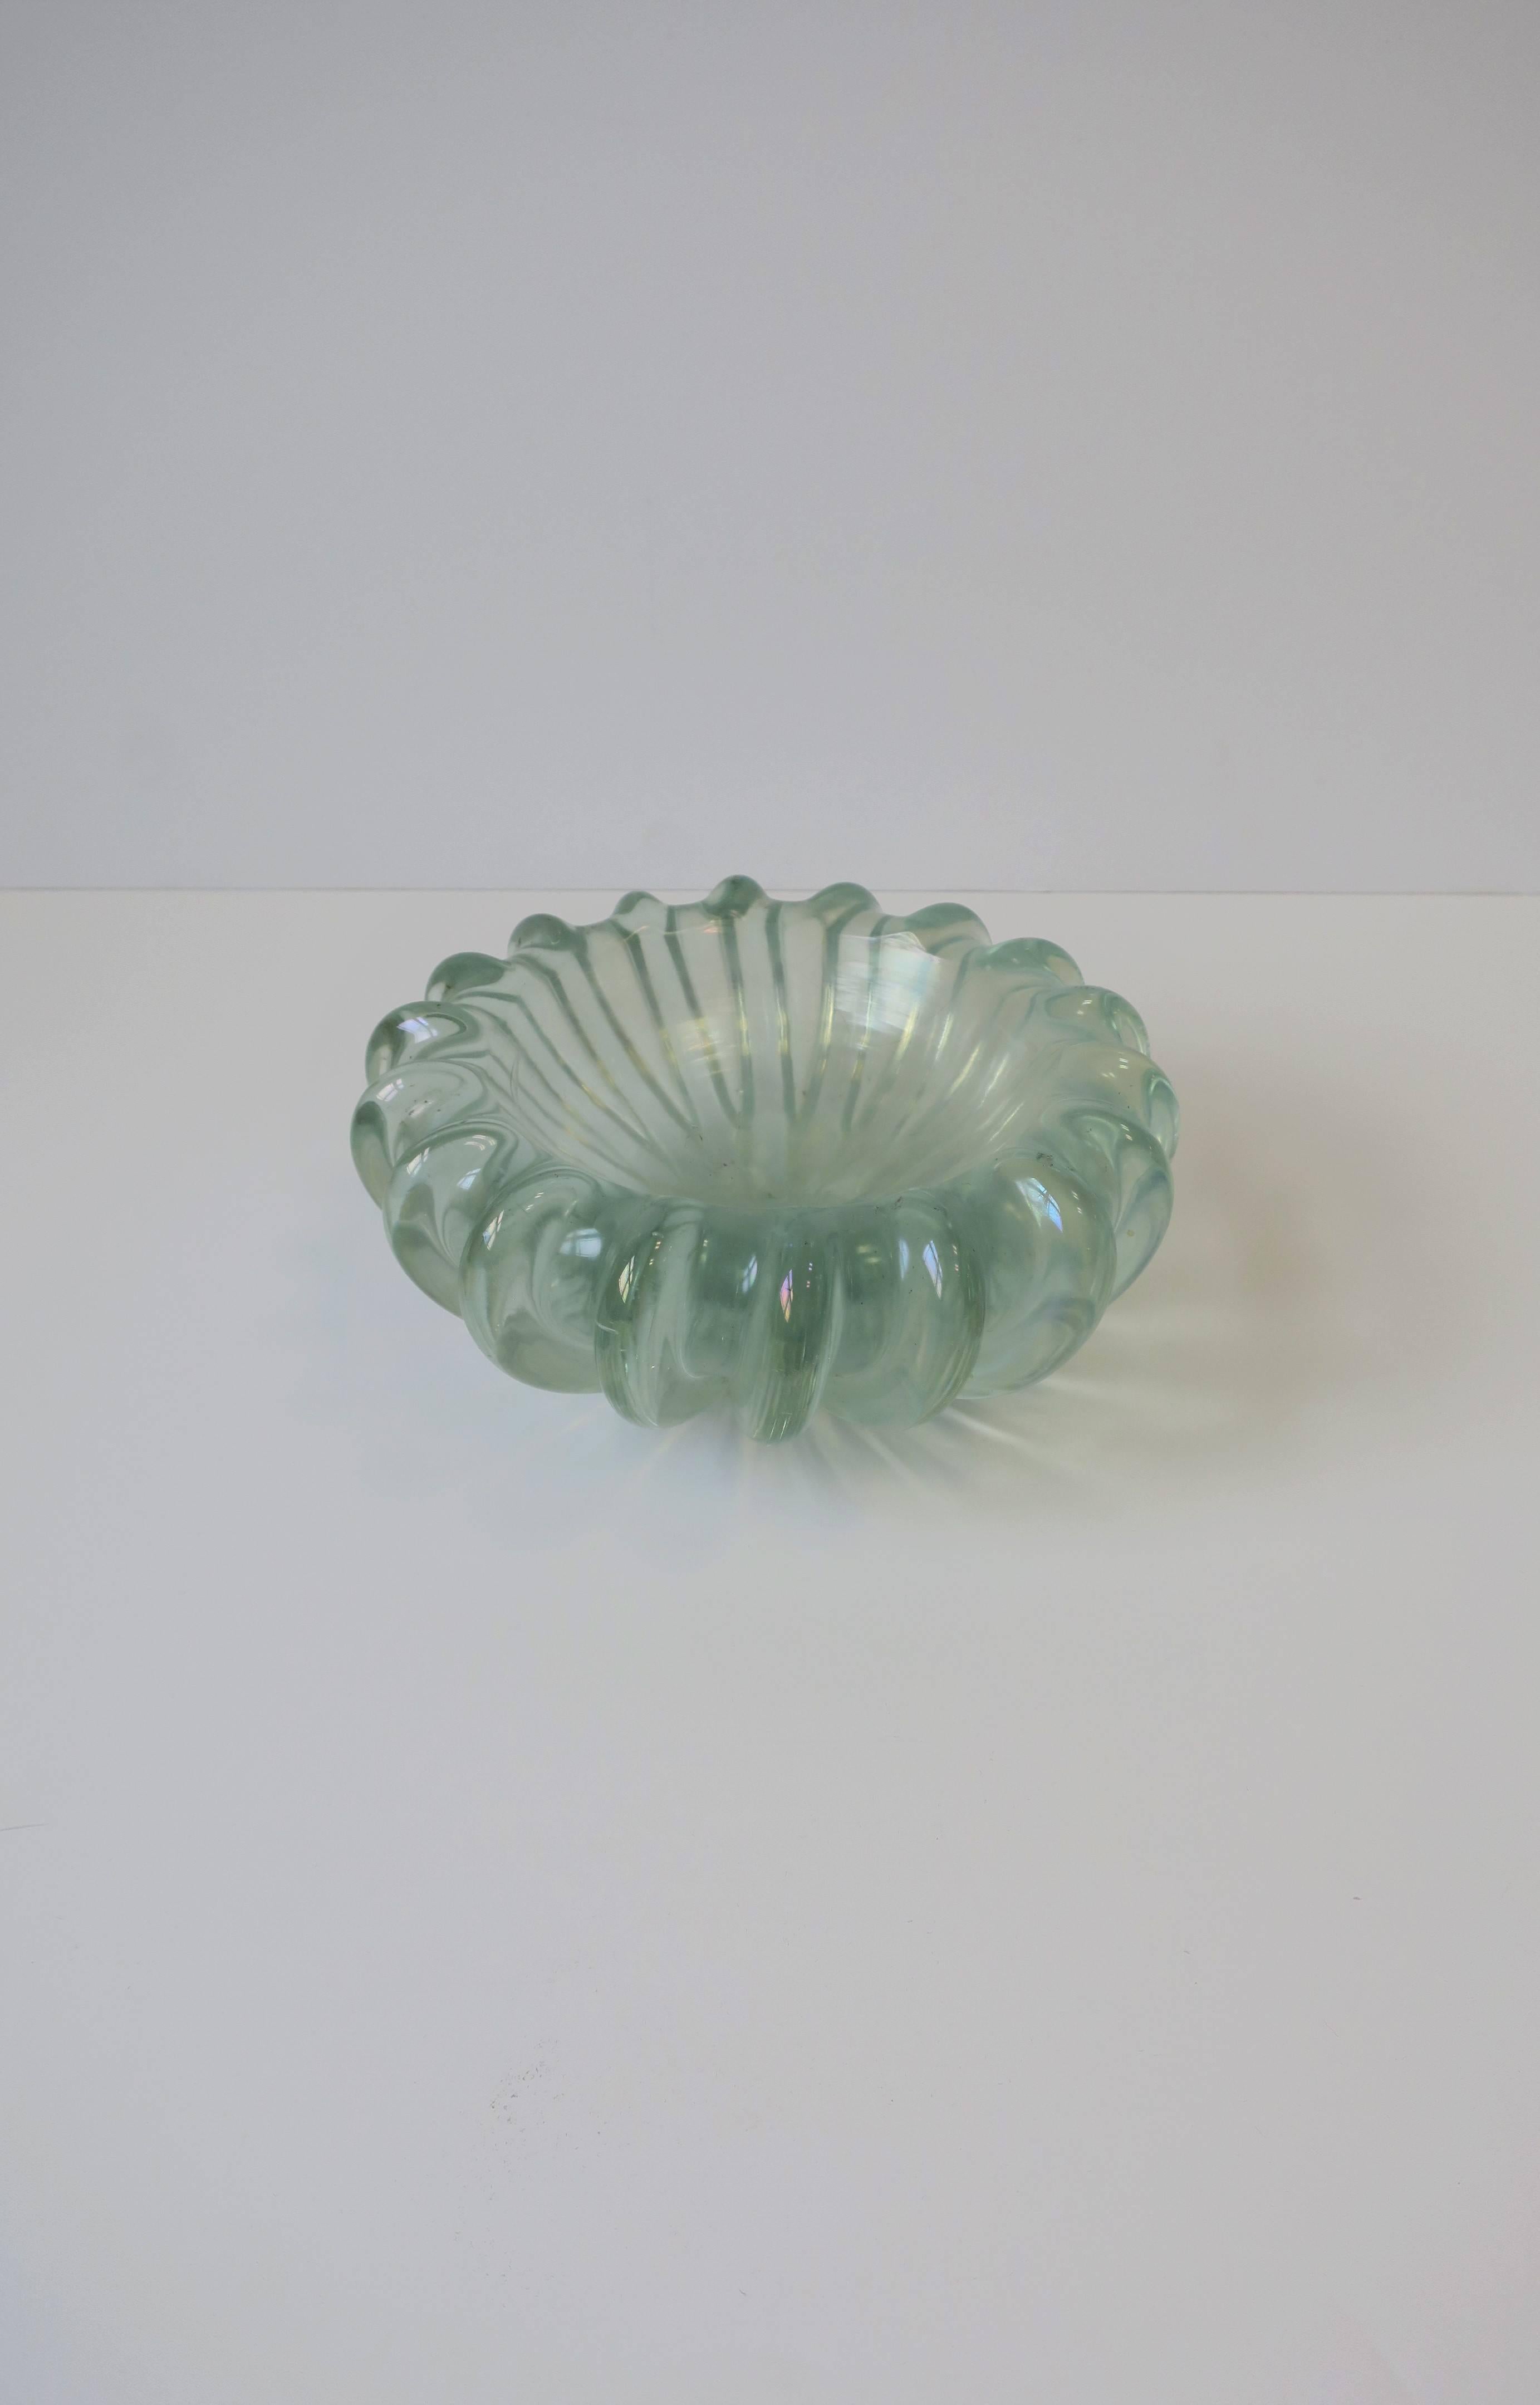 This is a substantial and gorgeous Italian Murano iridescent art glass bowl with fluted design, circa mid-20th century, Italy. Art glass hue is a translucent light sea-foam green with a shimmer of iridescence. Very good condition as shown in images.